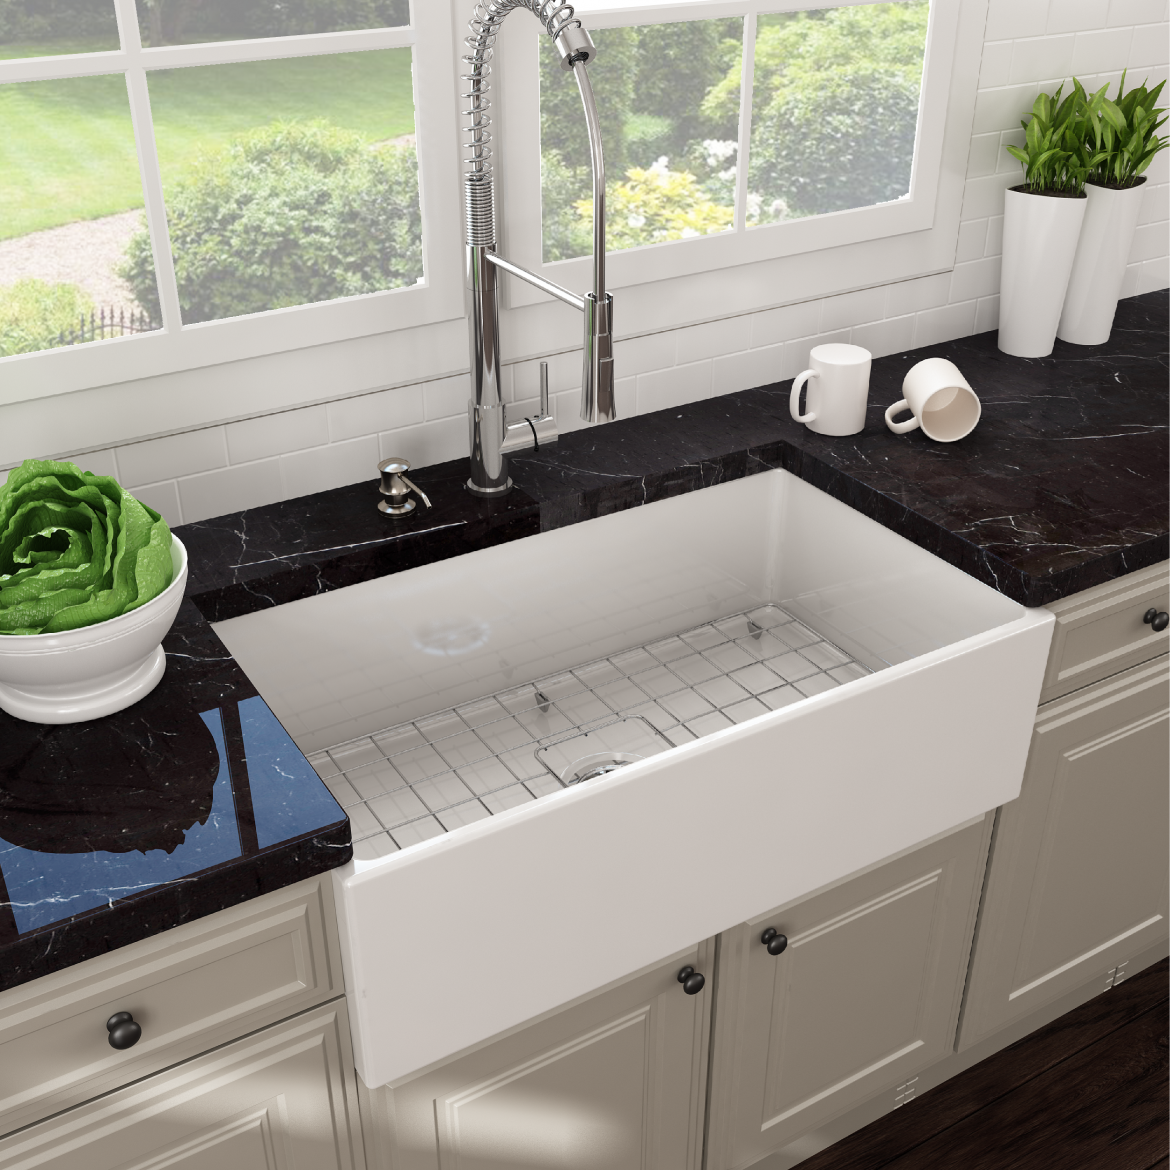 fireclay sink - what is the best type of sink for a kitchen